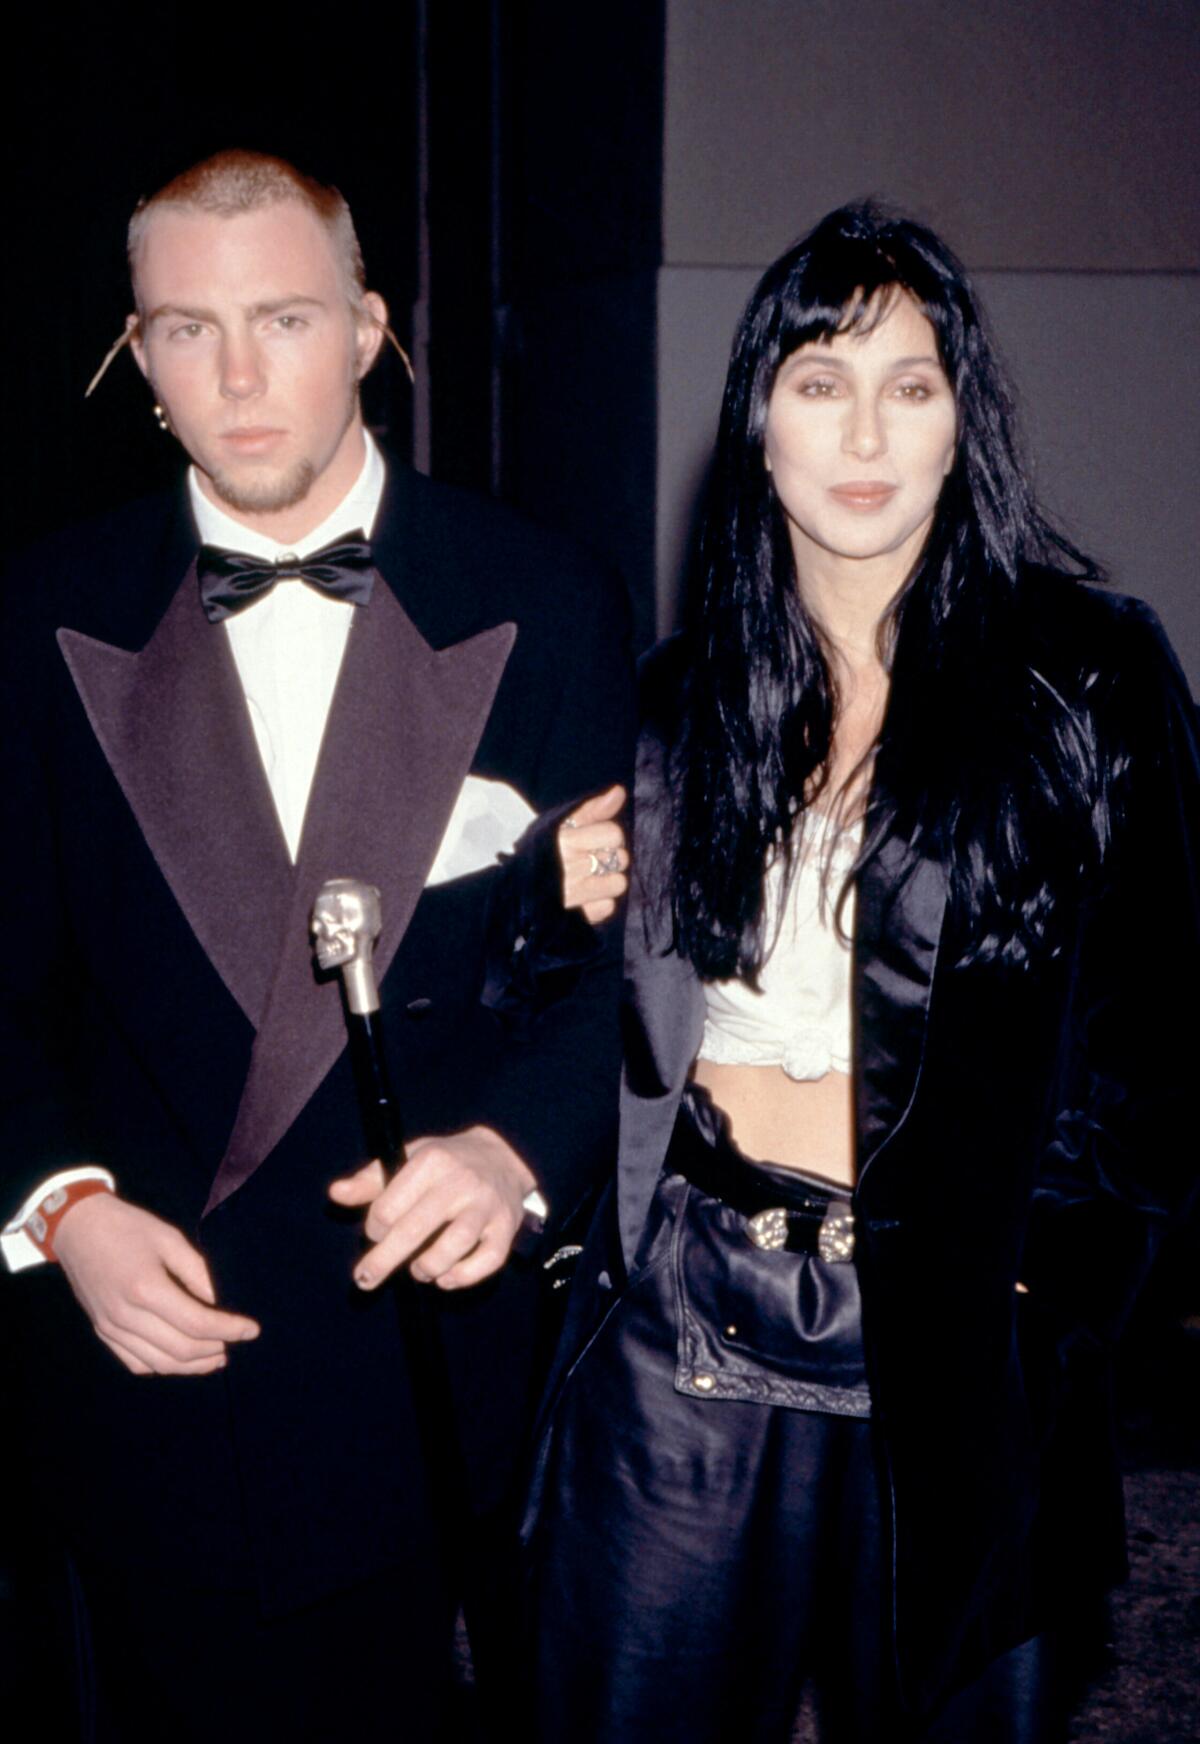 A young Elijah Blue Allman, in a tux, links arms with mother Cher, who is wearing a long black coat and white crop top